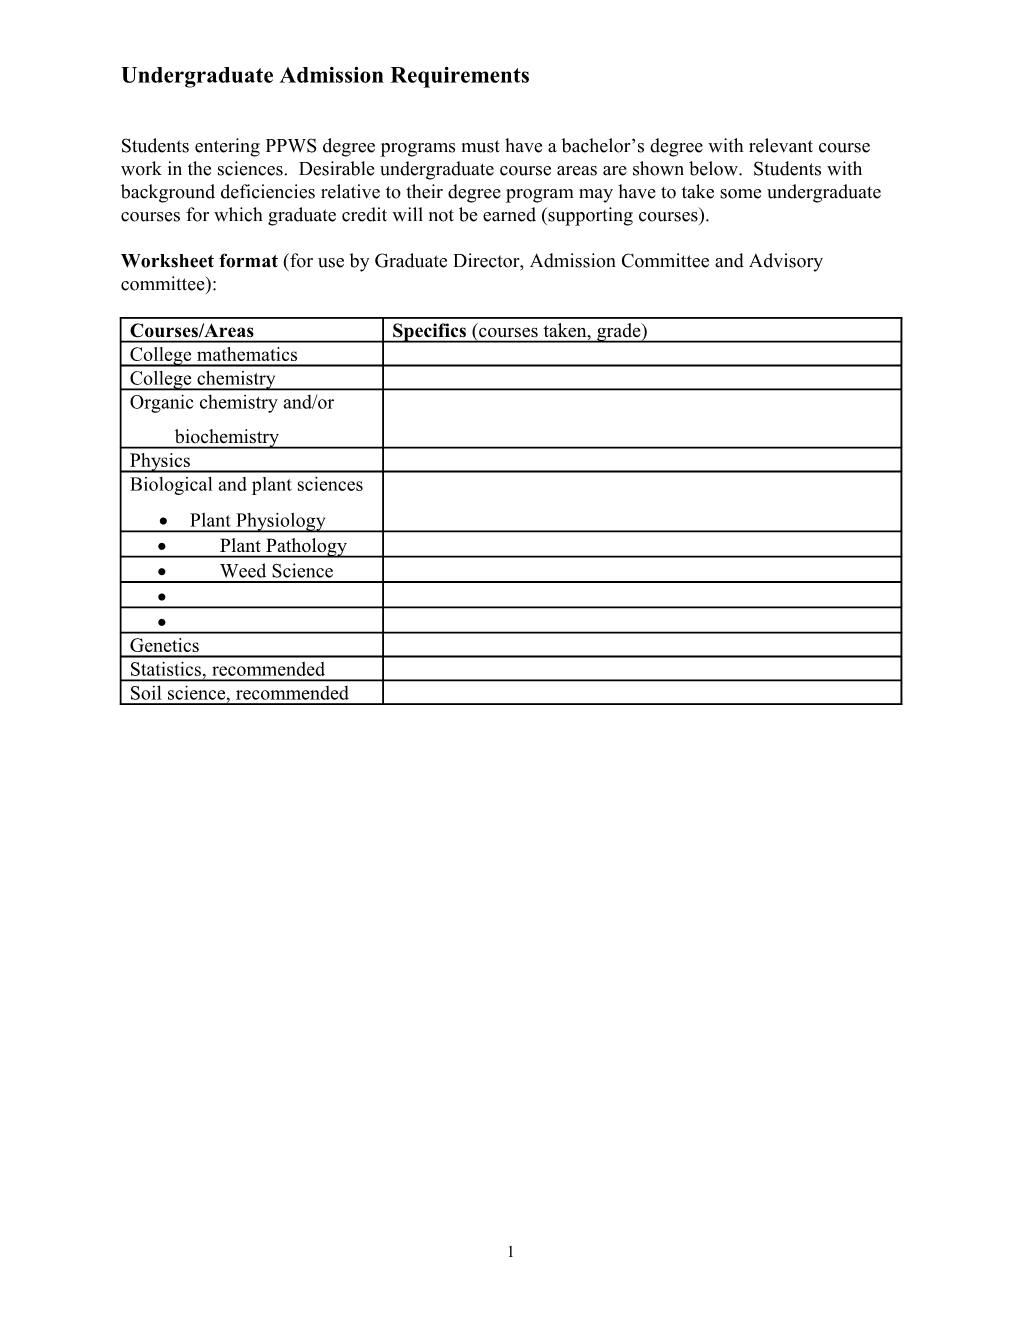 Worksheet Format (For Use by Graduate Director, Admission Committee and Advisory Committee)